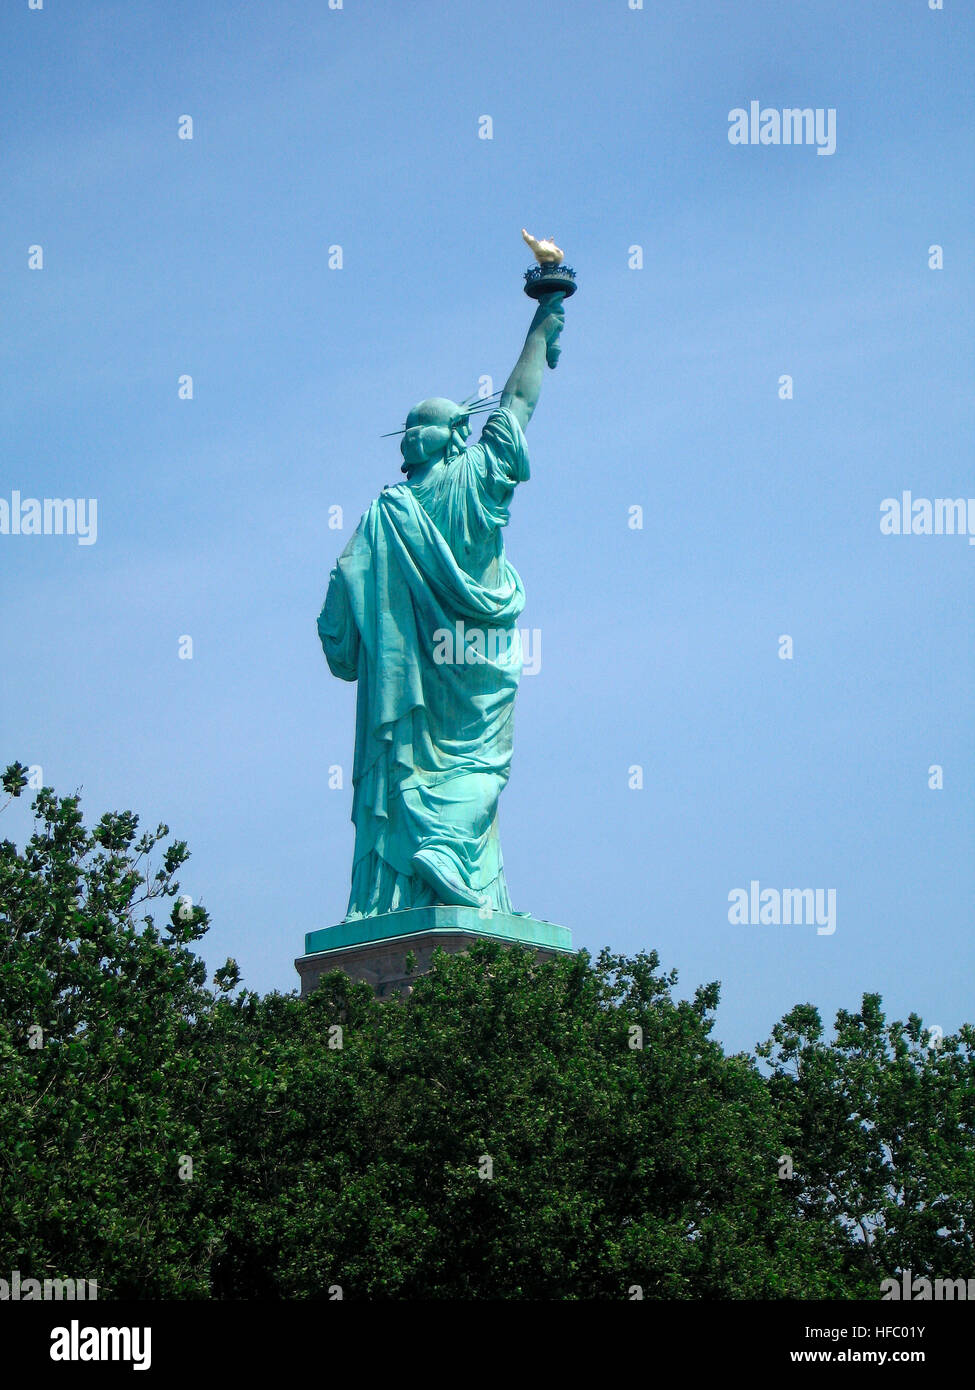 The Statue of Liberty, officially known as Liberty Enlightening the World, is a colossal neoclassical sculpture on Liberty Island in New York, USA. Stock Photo